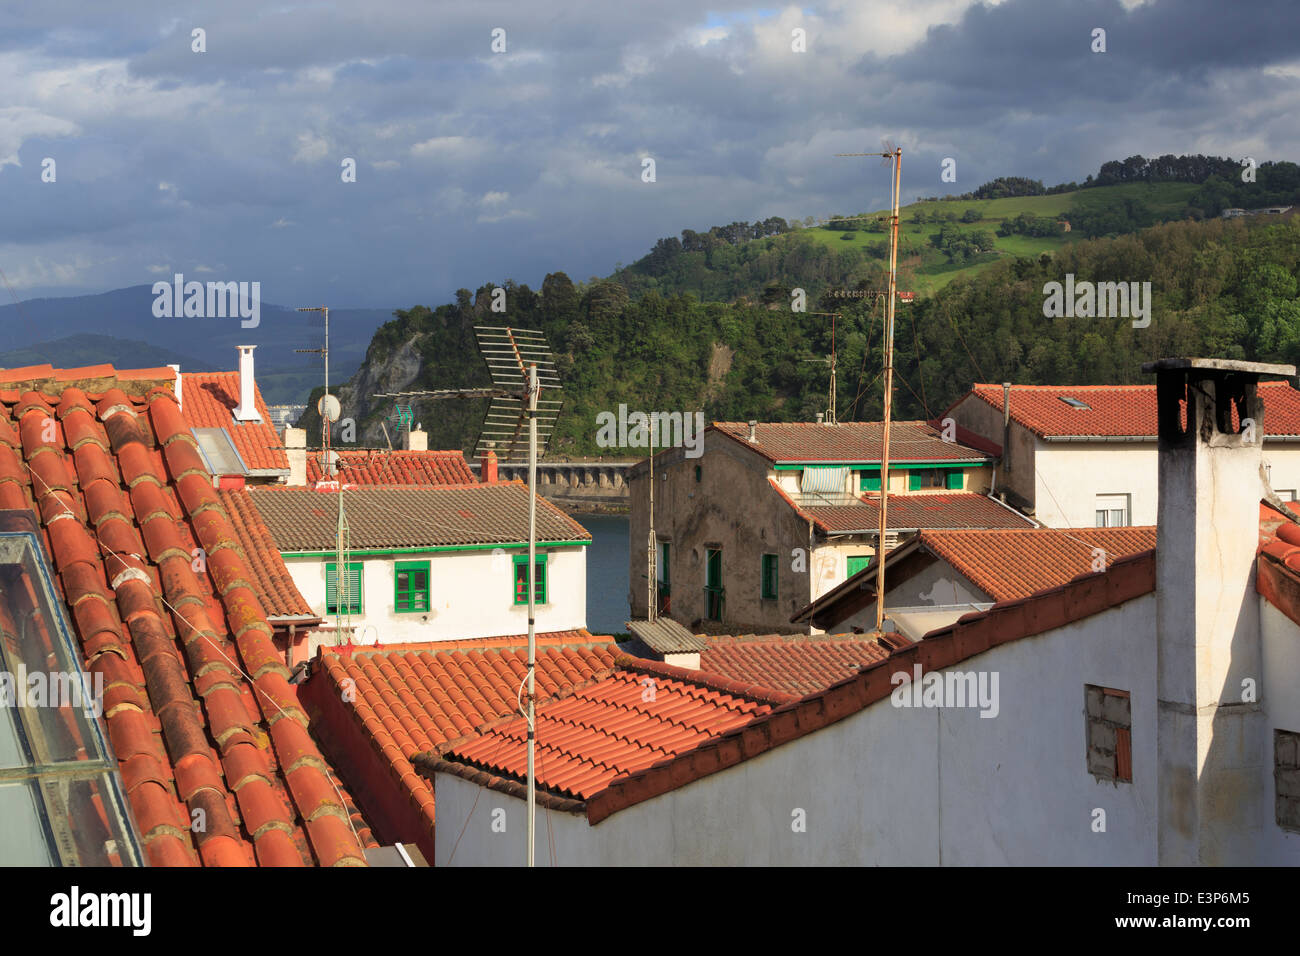 Getaria, Gipuzkoa, Basque Country, Spain. Tiled roofs of the houses of the historic fishing village. Stock Photo